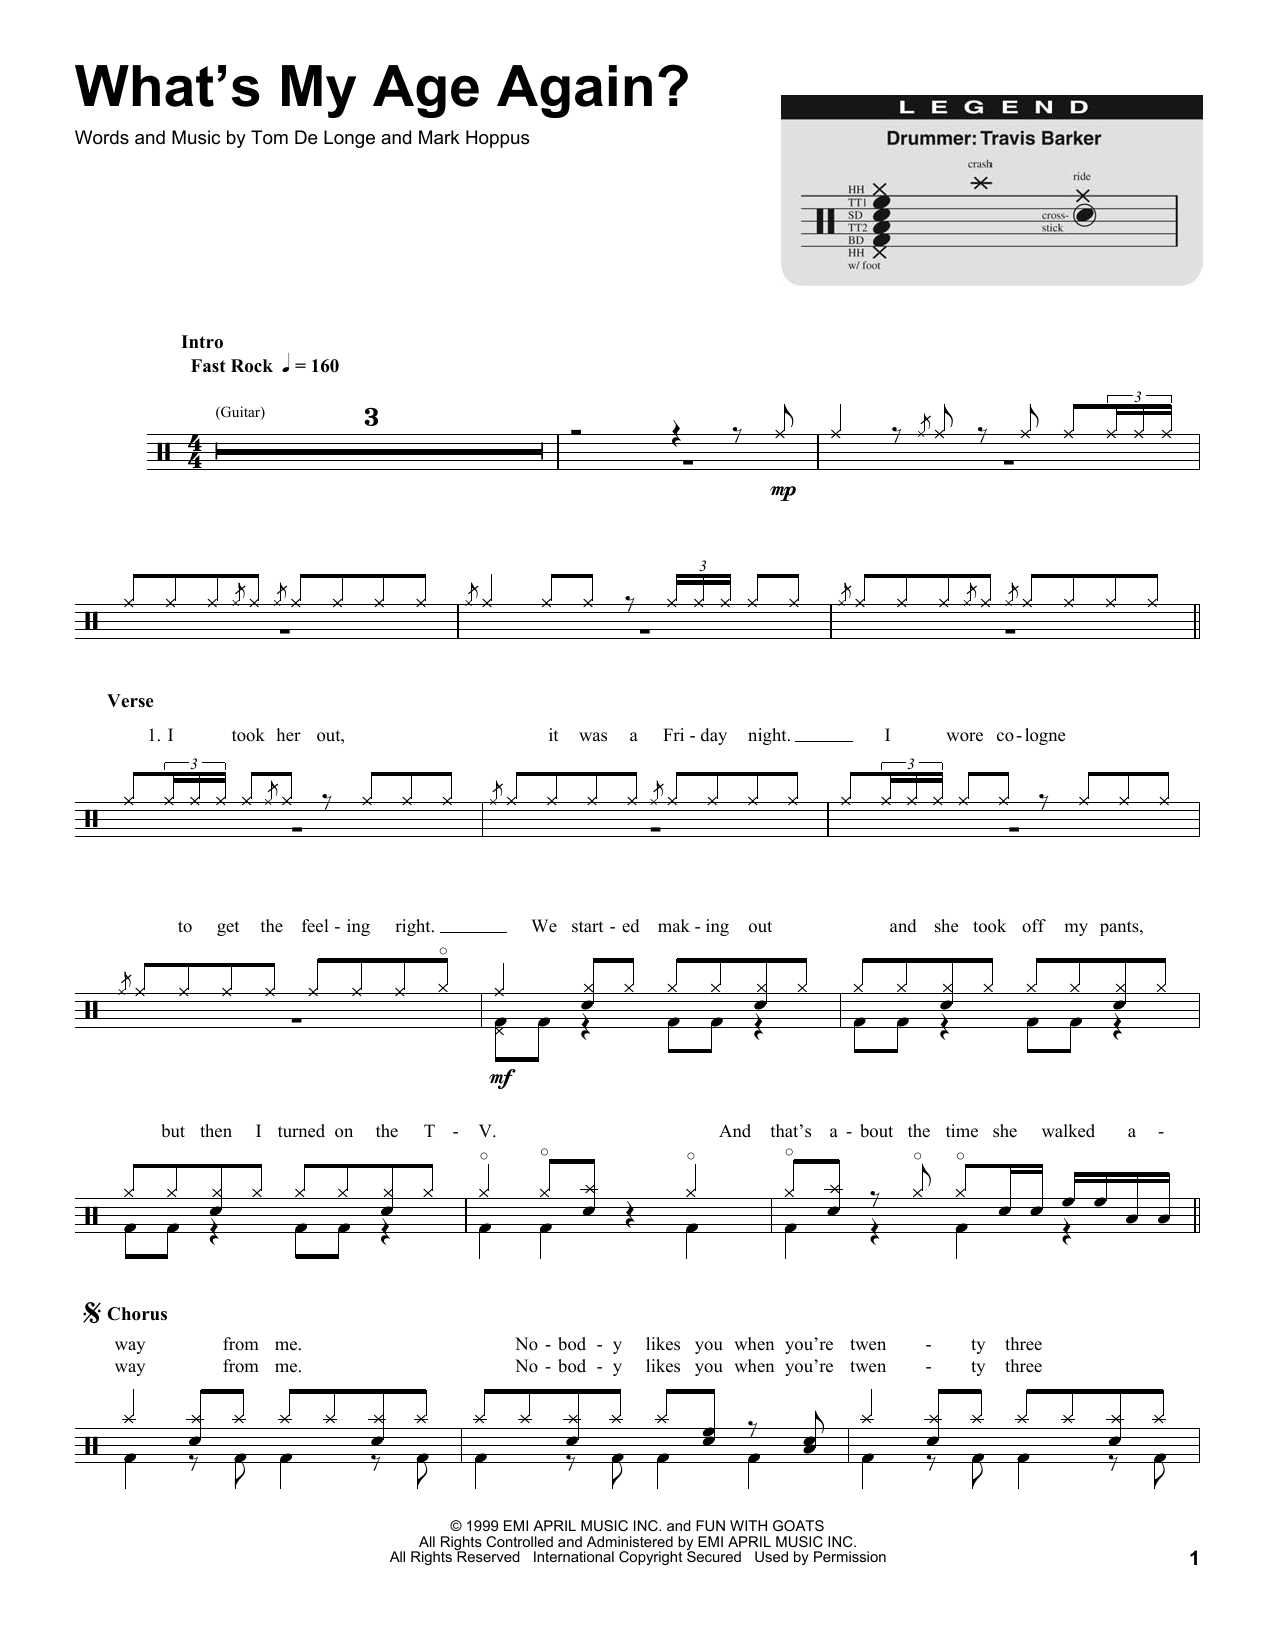 Blink 182, What's My Age Again?, sheet music, piano notes, score, chor...